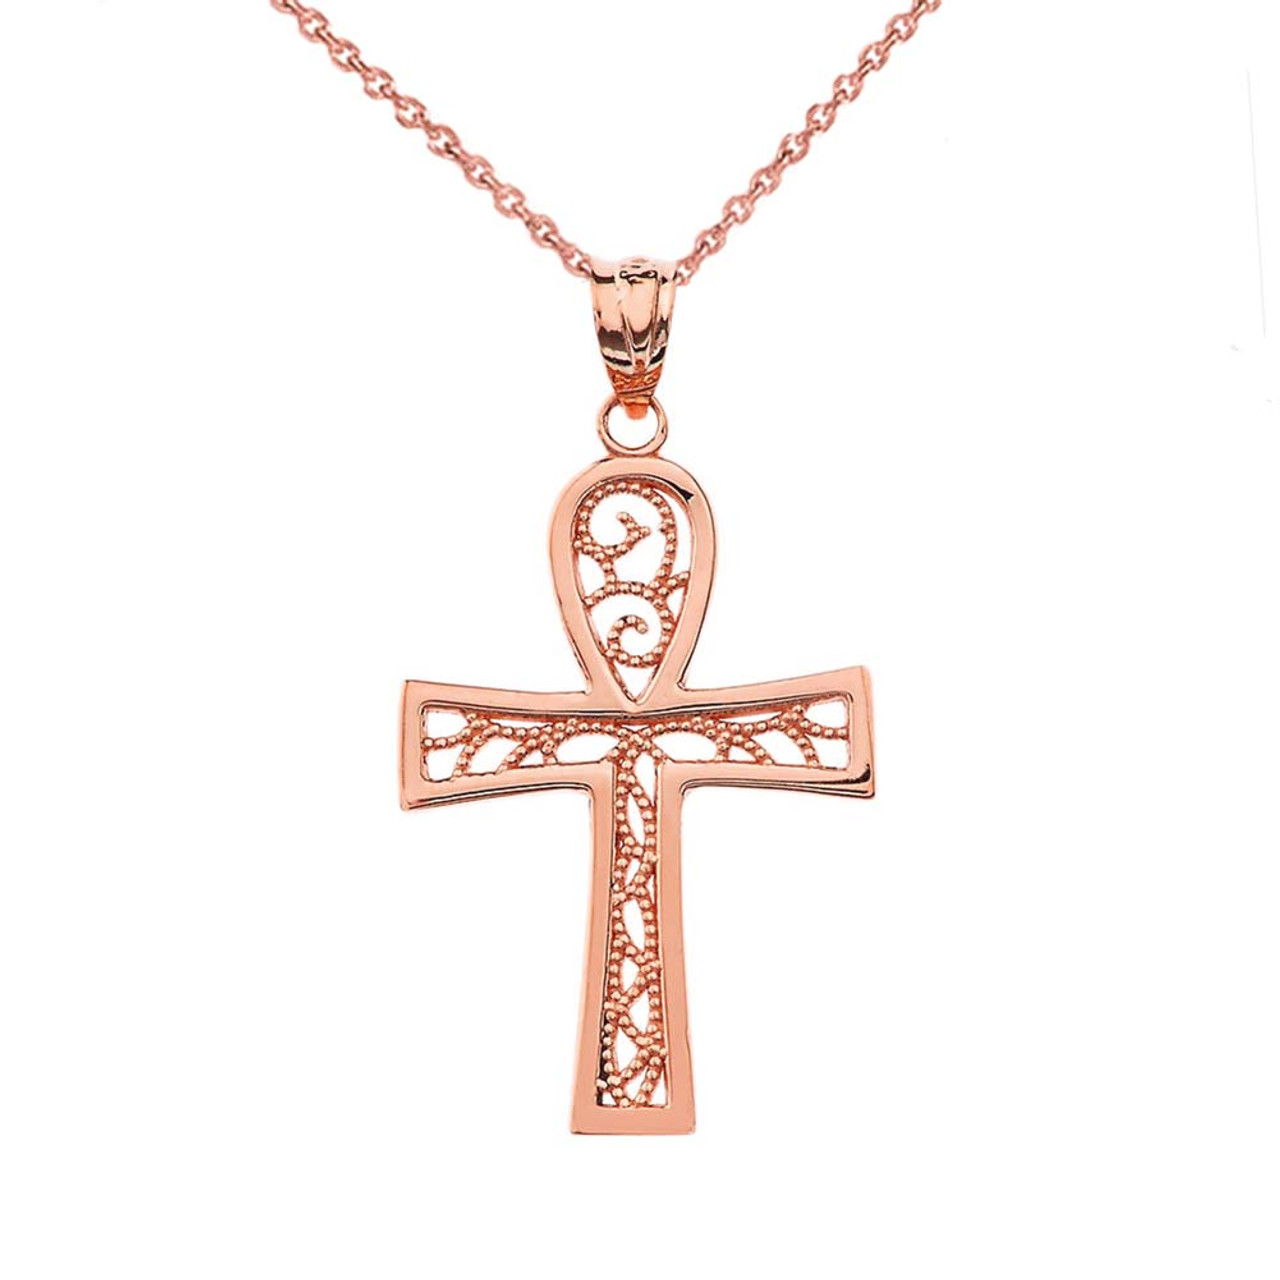 Filigree Ankh Cross Pendant Necklace in Rose Gold